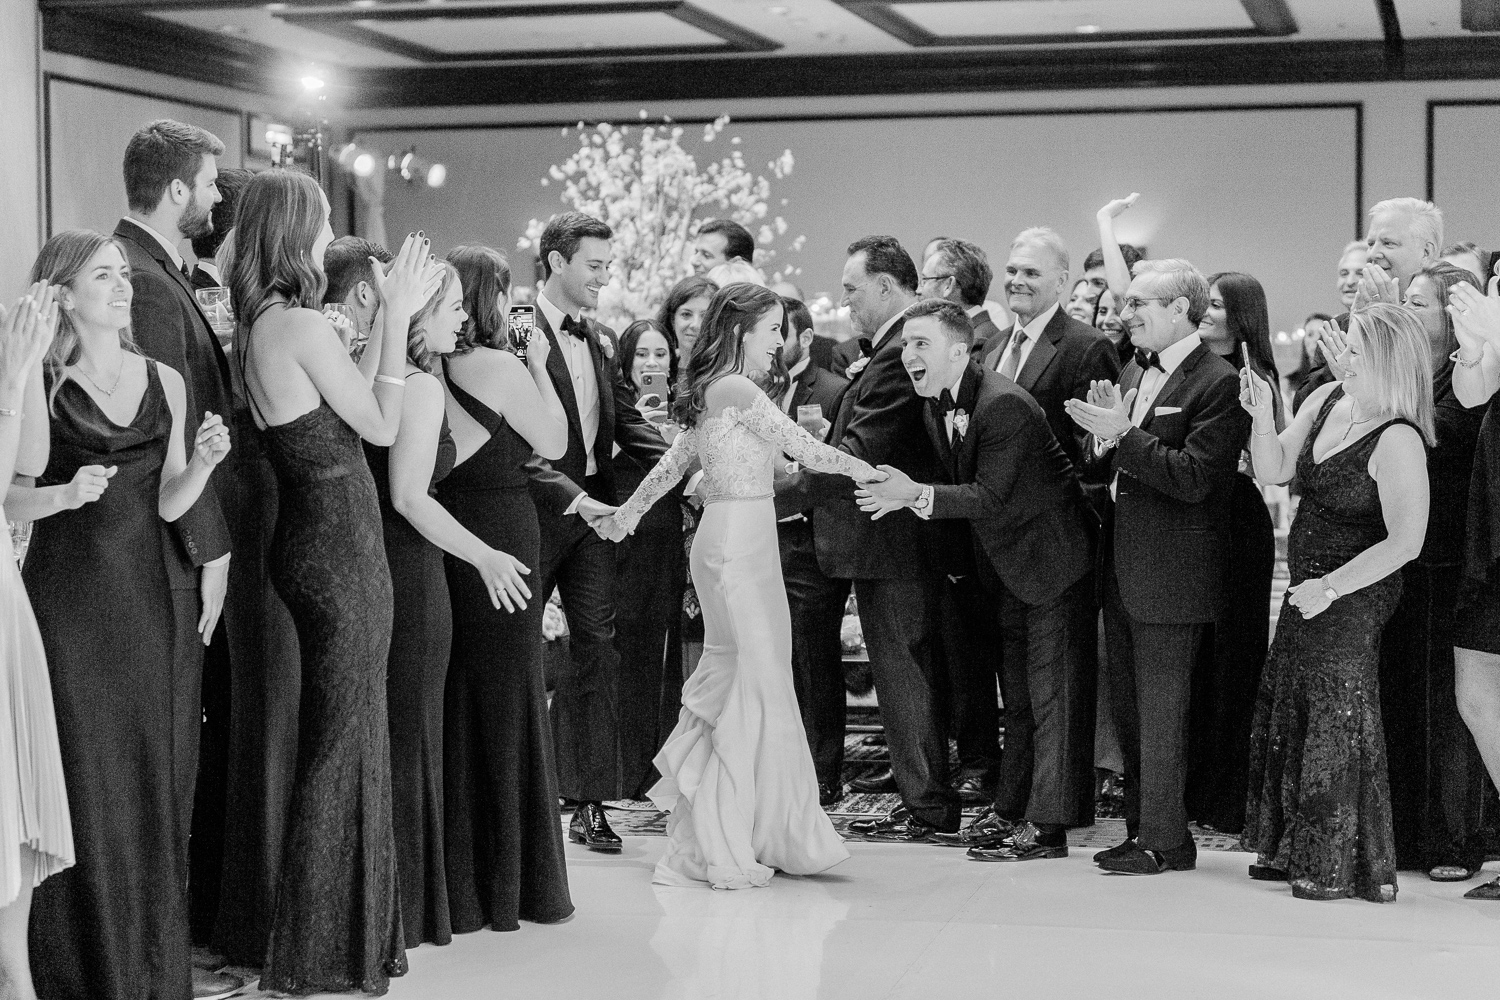 How much does wedding photography cost? – Chicago Naples Fine Art Wedding Photographer